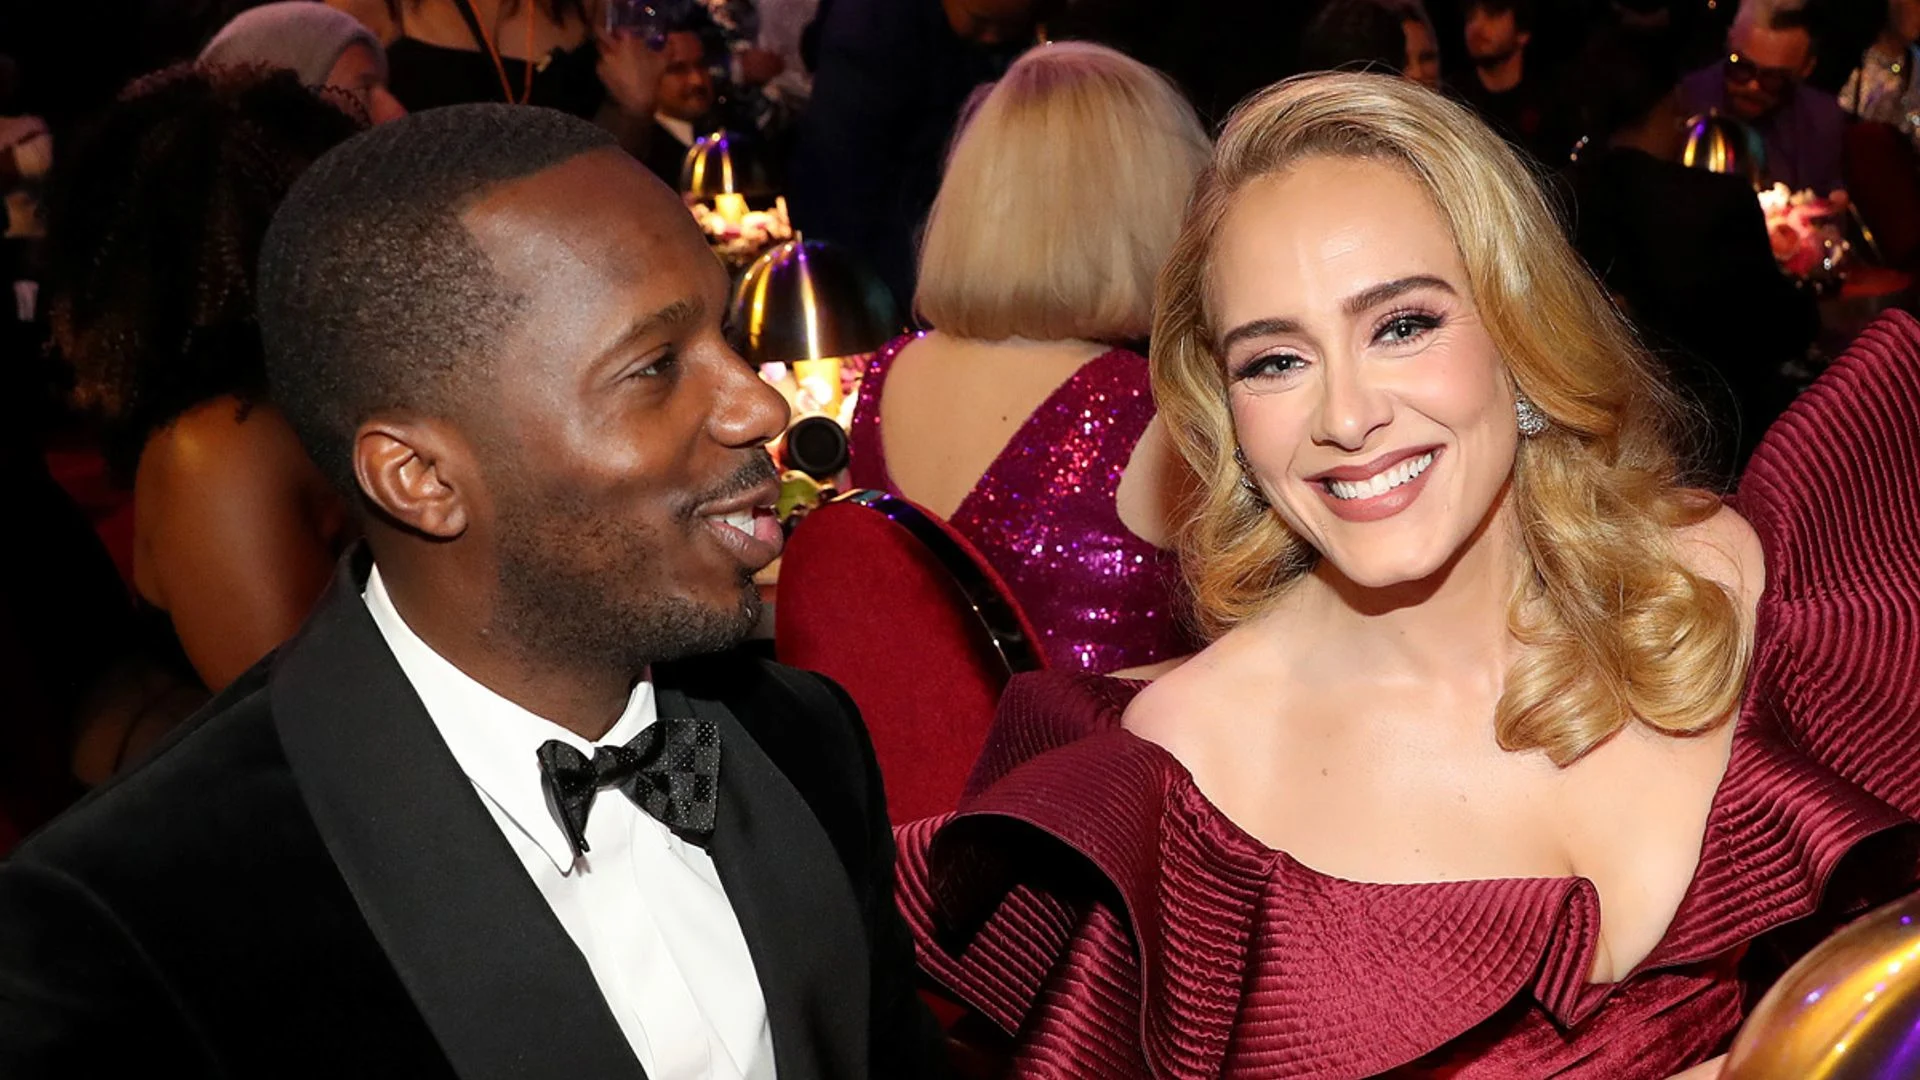 Rich Paul and Adele